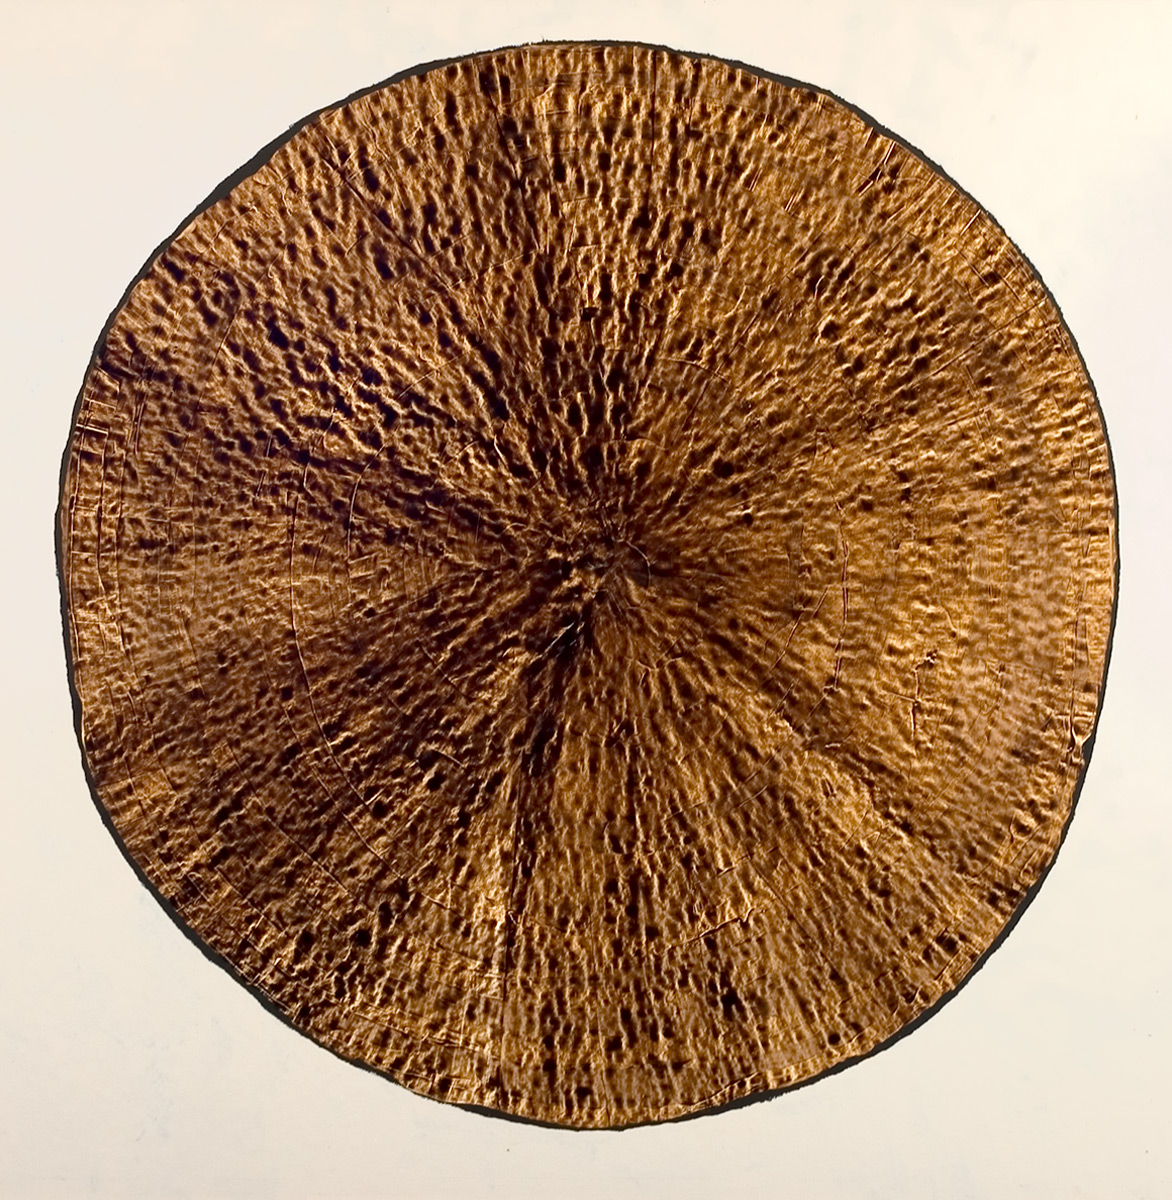 Painting on a beige background of an imperfect circle filled in with a brown texture radiating from the centre.